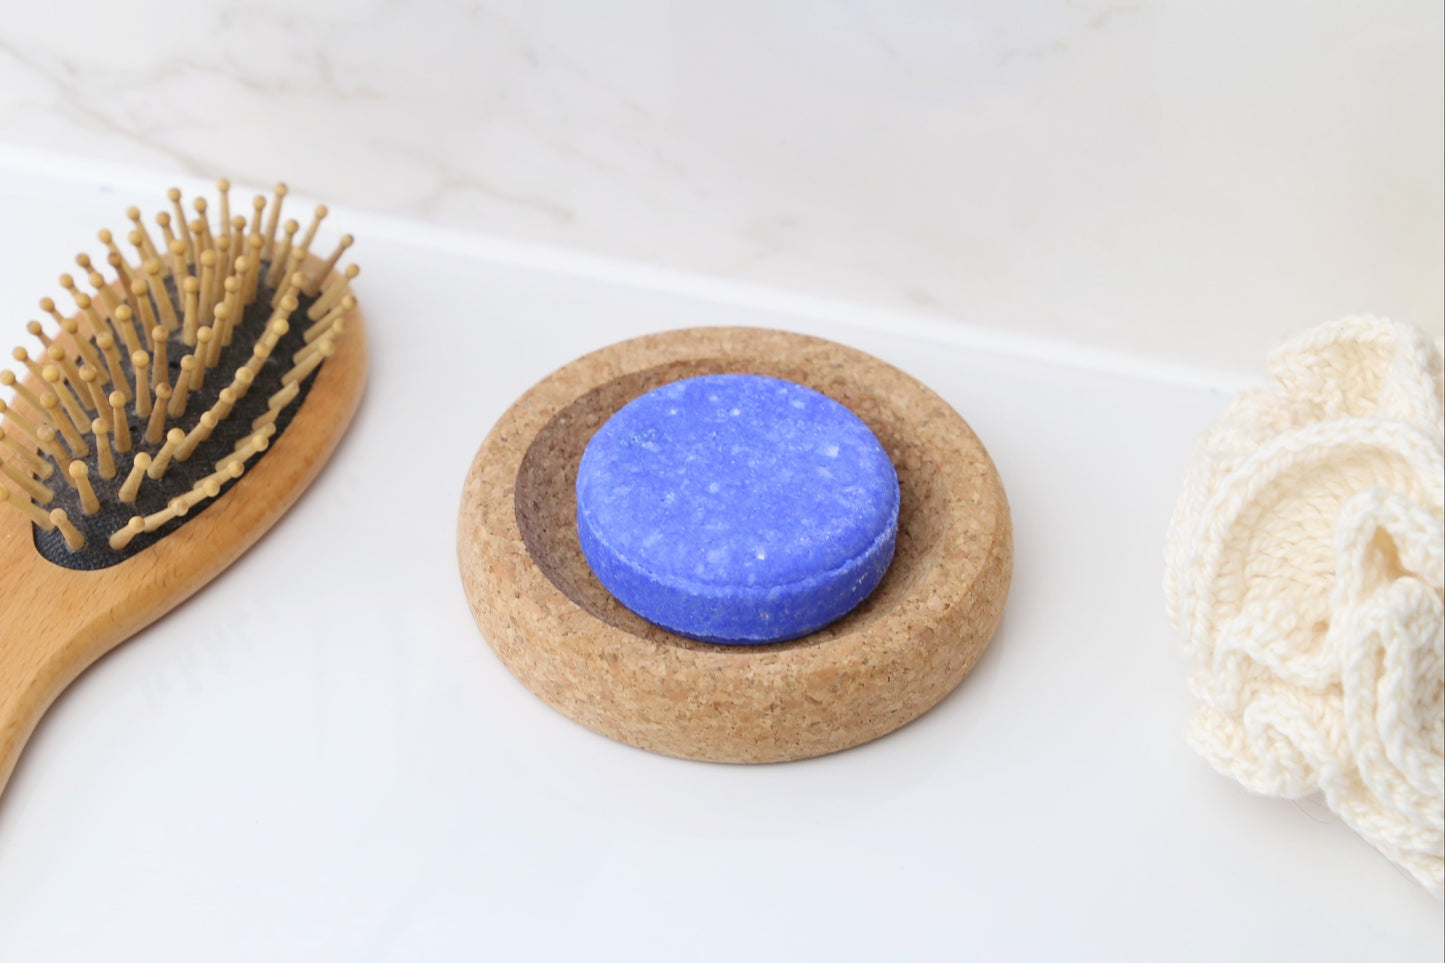 shampoo bar lavender solid blue bar lavendel handmade in the netherlands with comb, lavender plant and a towel